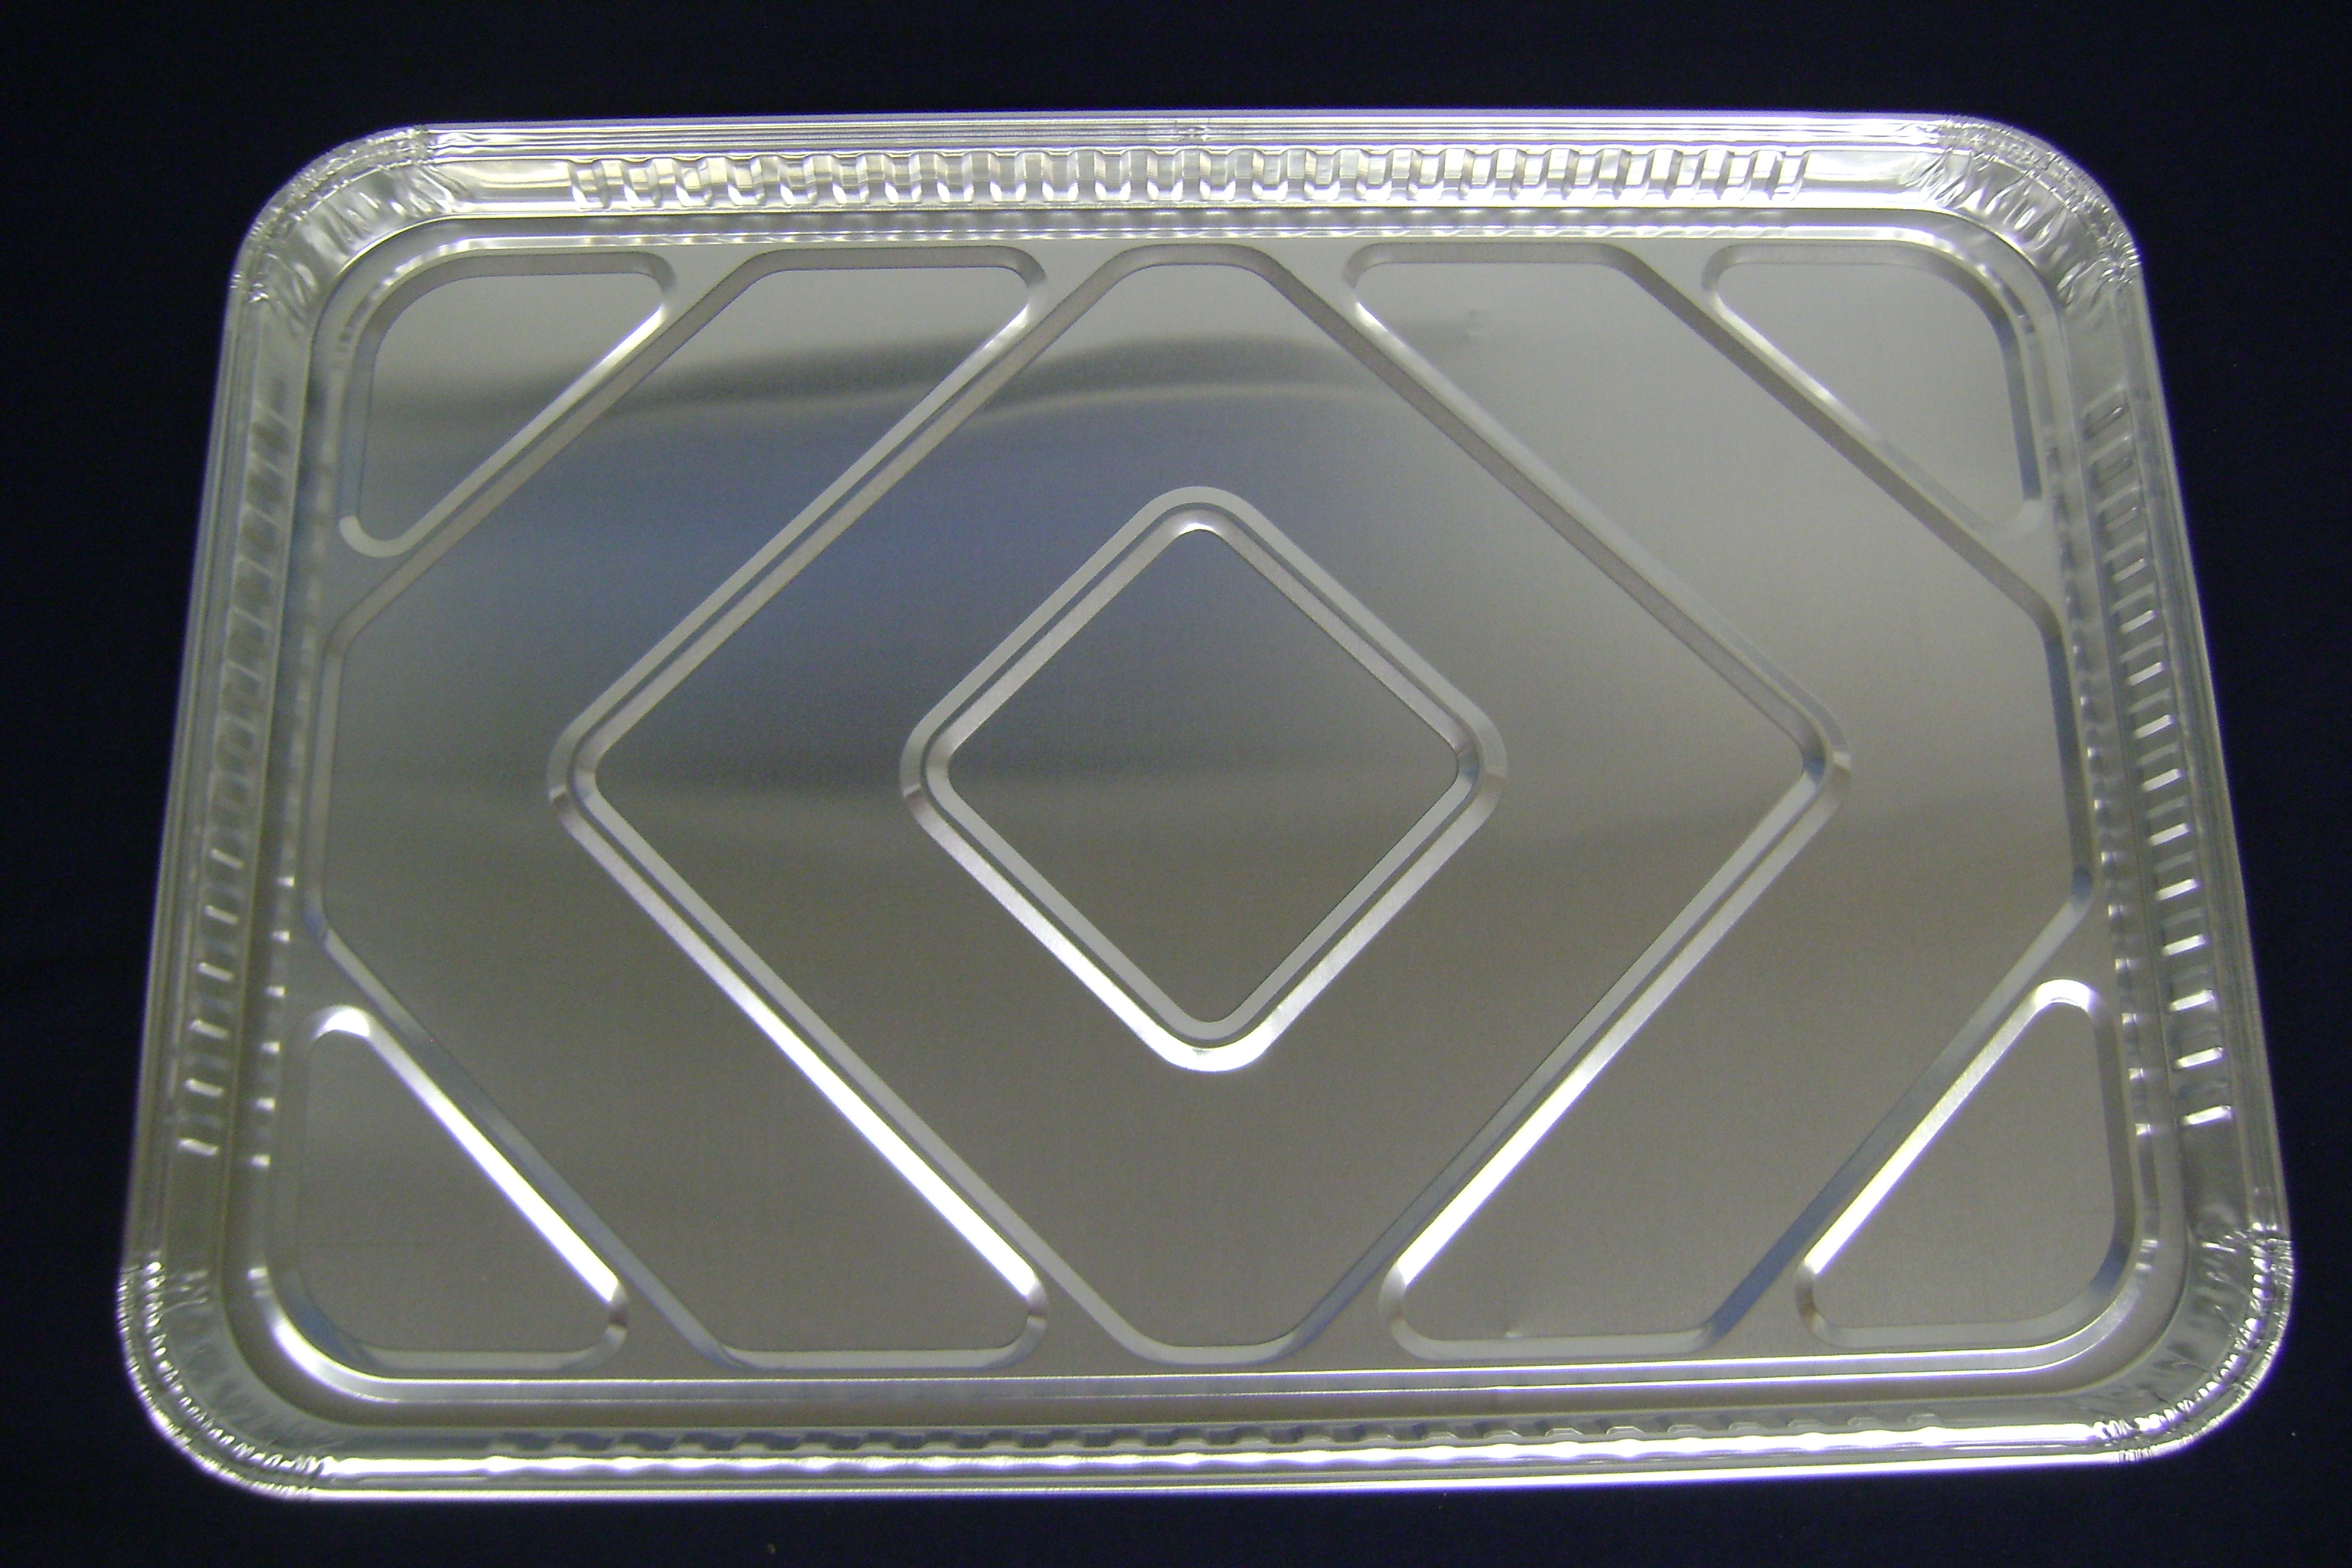 Durable Packaging 8 x 8 Square Disposable Aluminum Holiday Cake Pan with Clear Dome Lid #9101x (10)